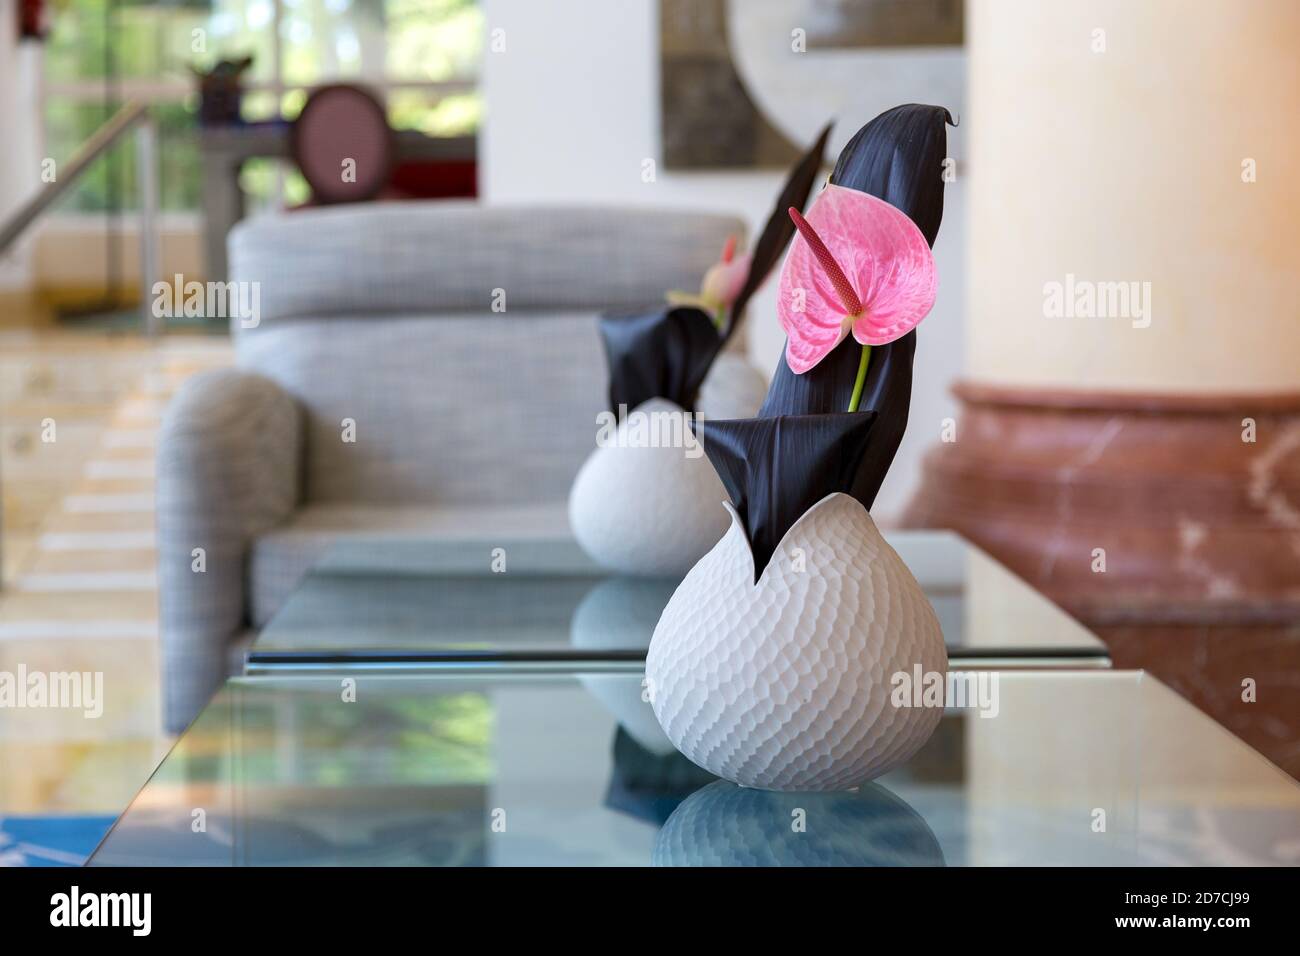 5 star hotel lobby.Floral interior design. Pink Anthurium Aracea flower bouquet Laceleaf Tailflower Flamingo flower in a white vase on a glass table. Stock Photo